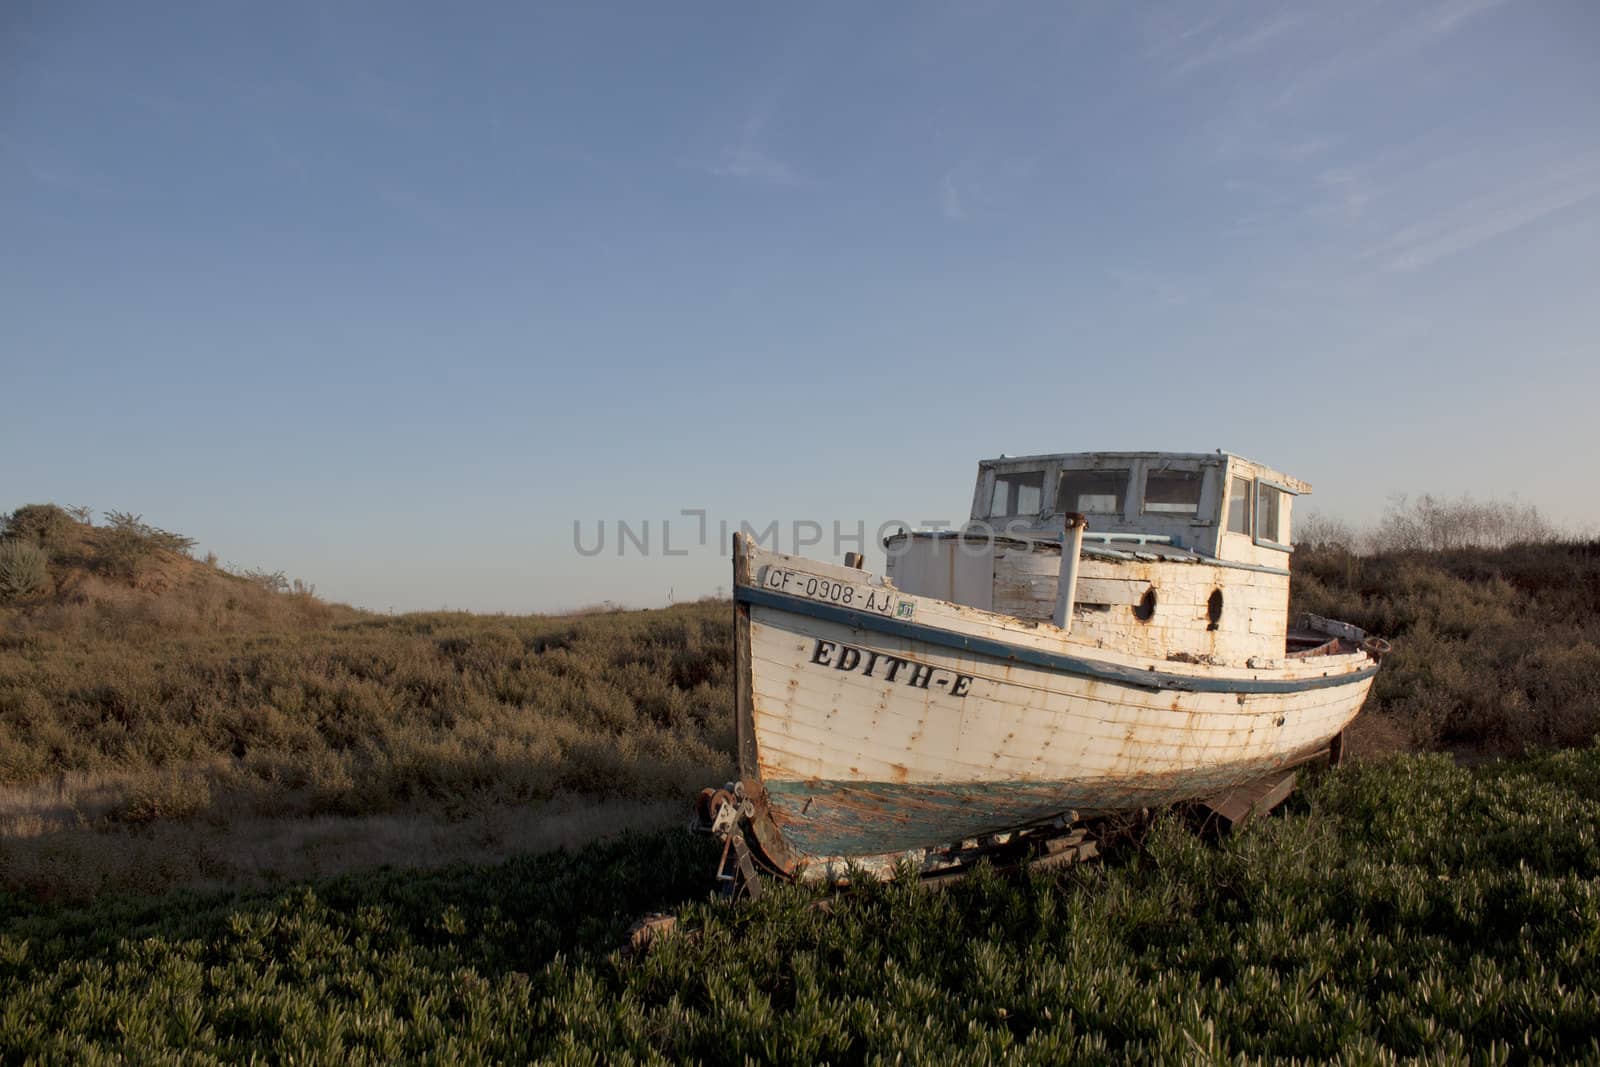 an old abandoned boat out of water with a blue sky.